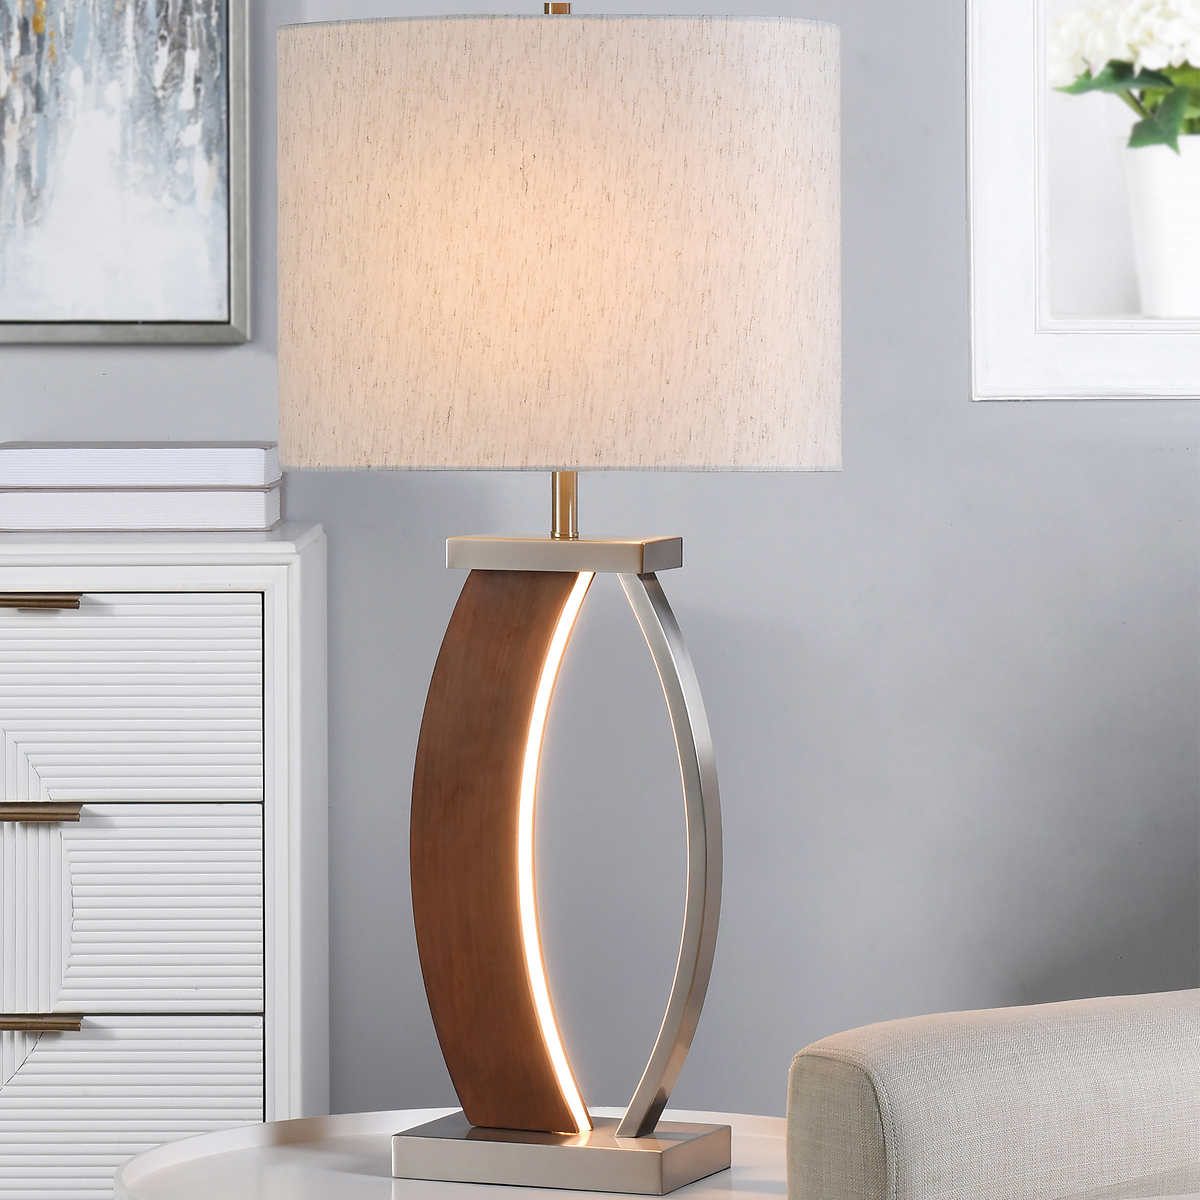 Mirabeau Table Lamp With Led Night, Living Room Table Lamps With Night Light In Base